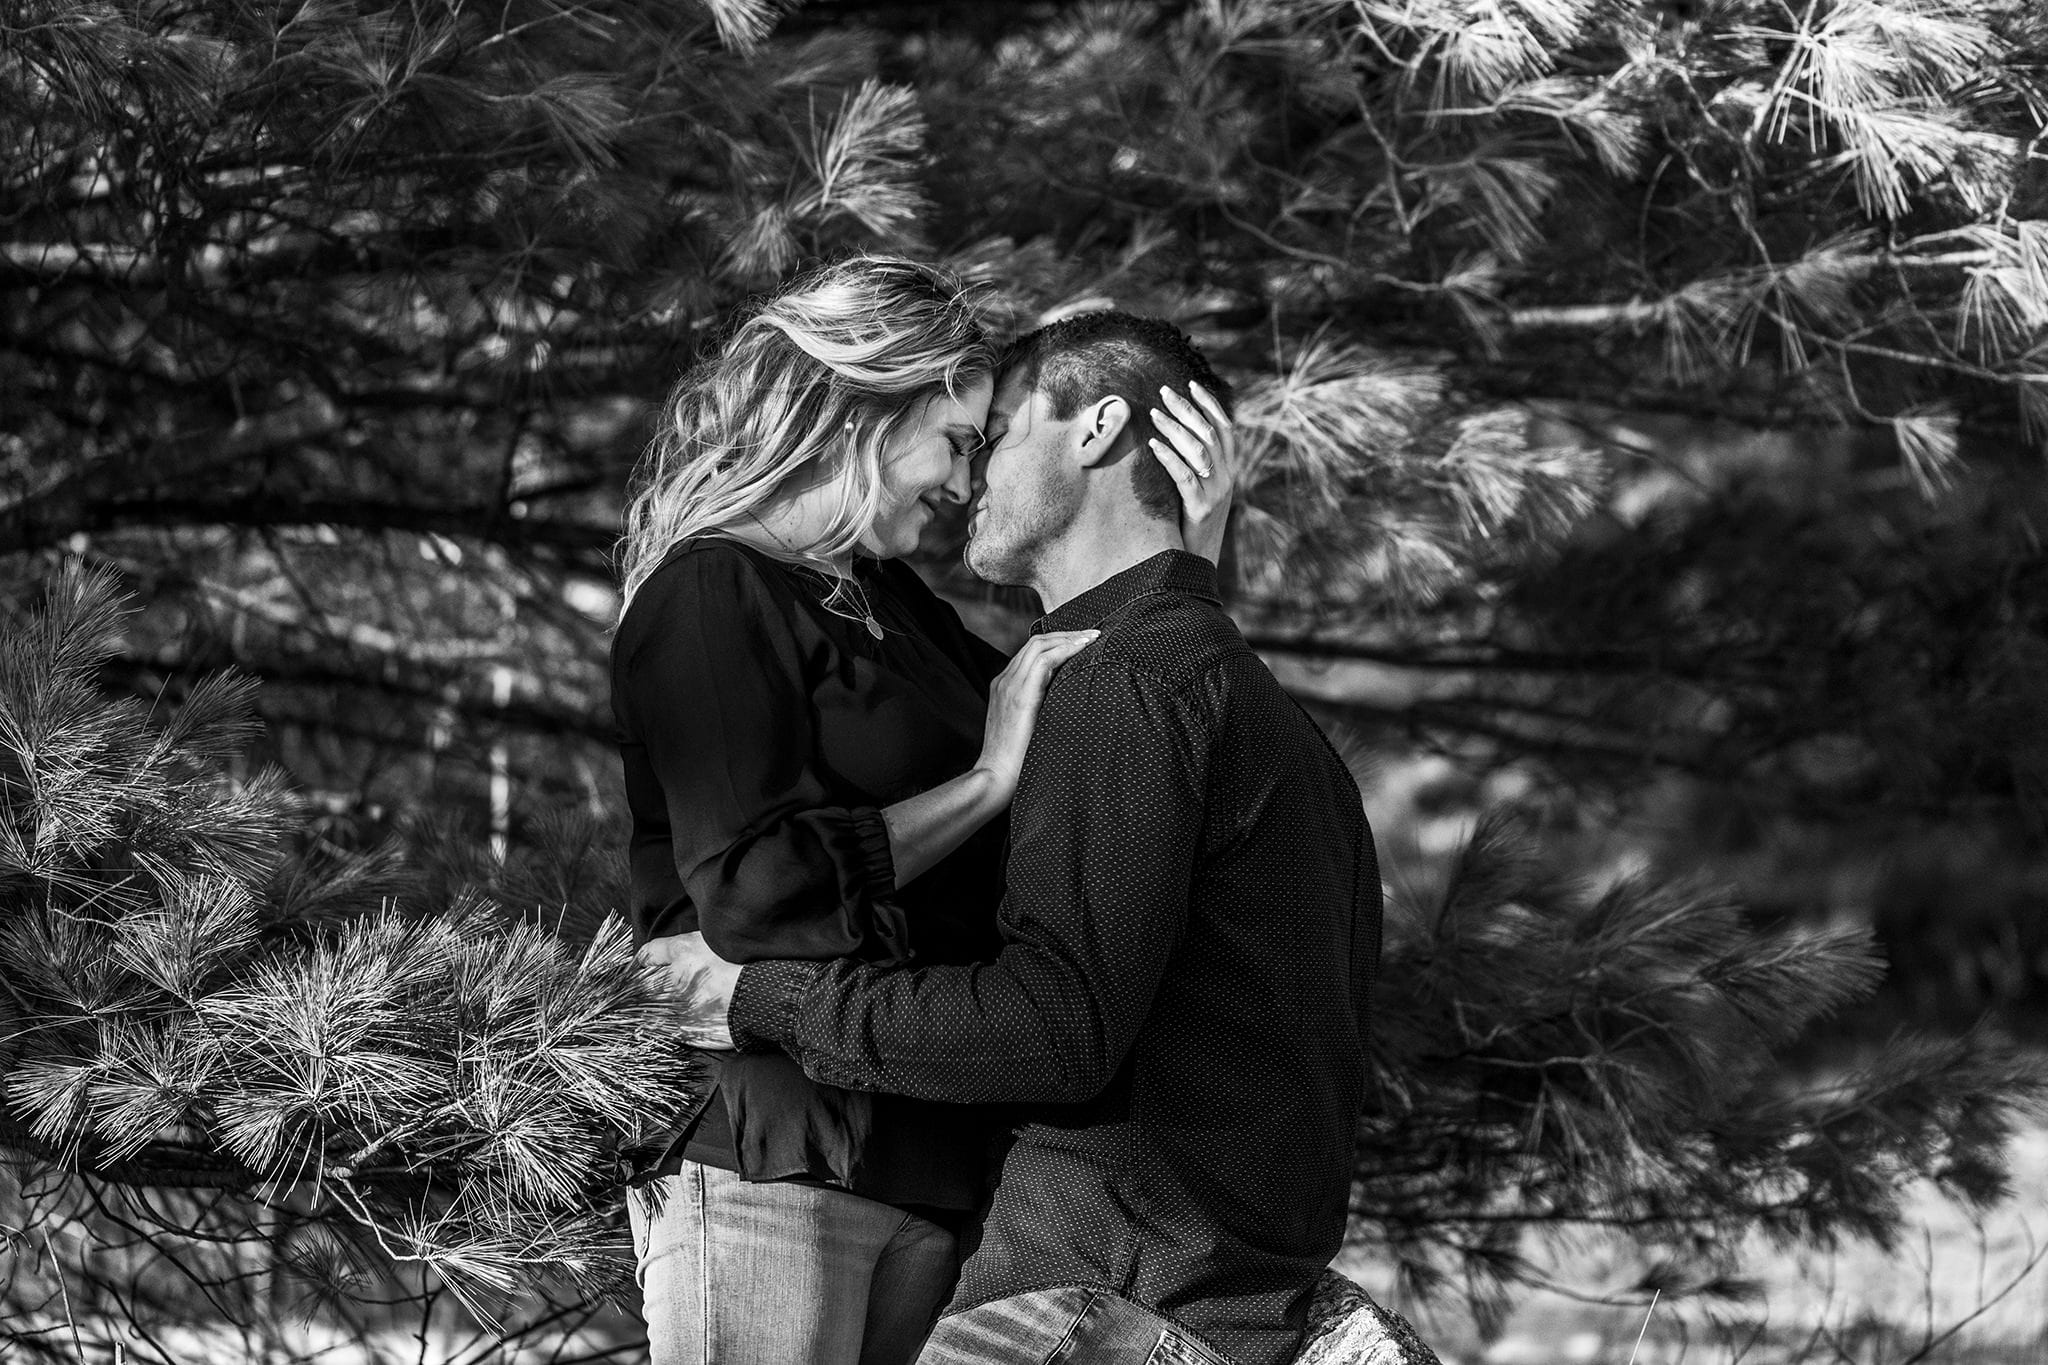 woman leans in to kiss fiancé while surrounded by pine branches